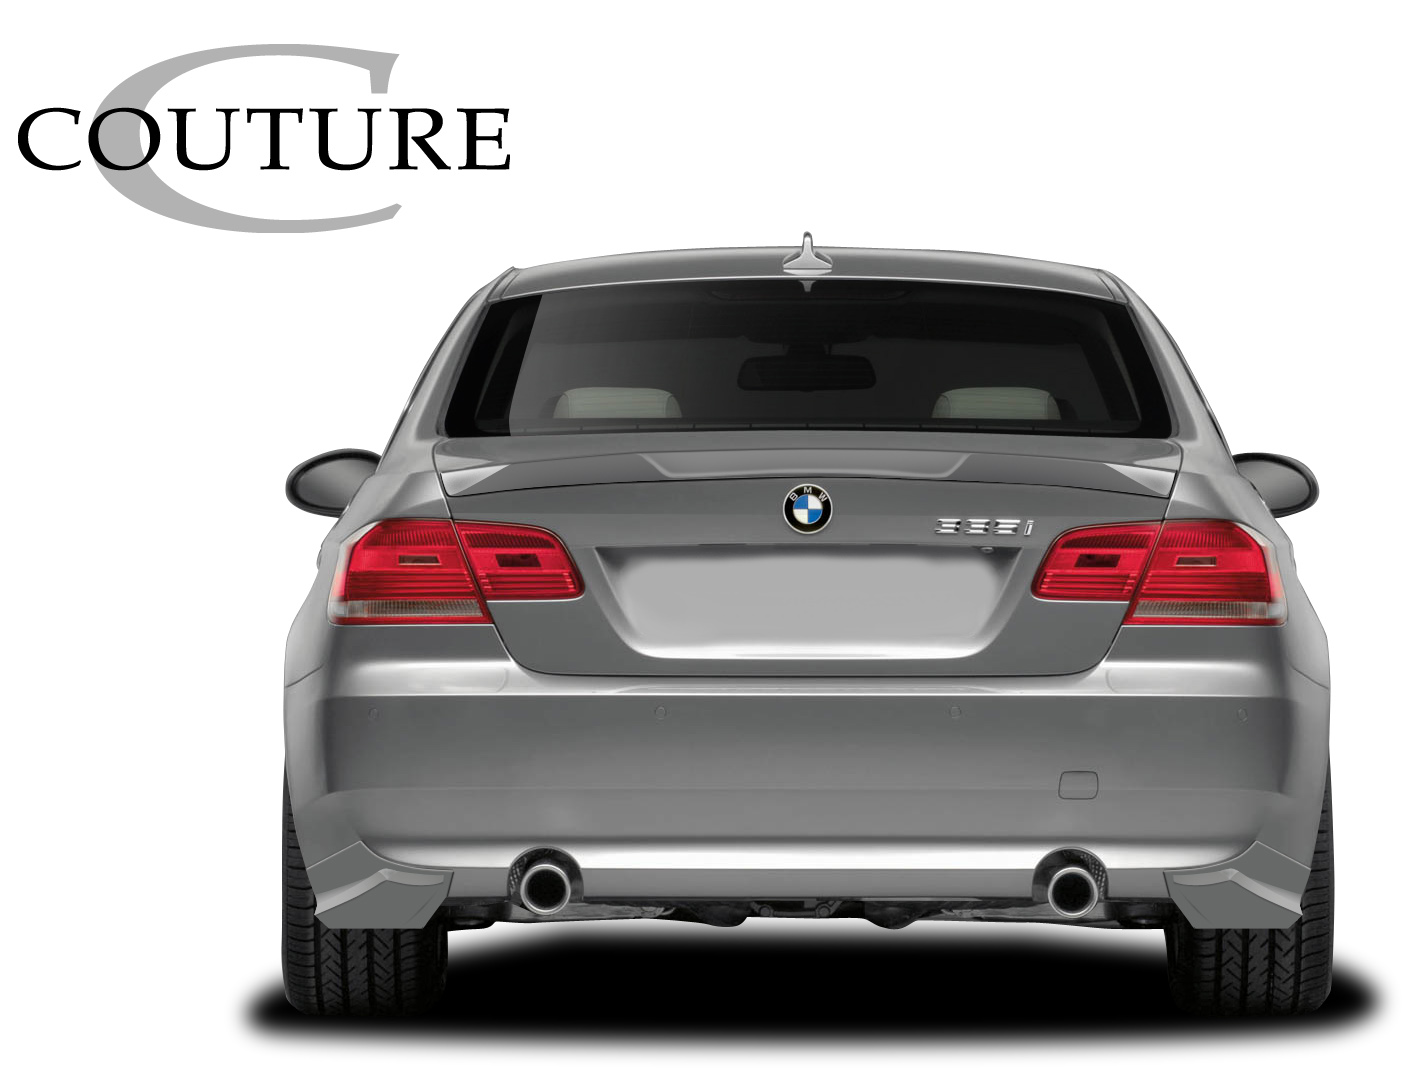 2012 BMW 3 Series 2DR - Polyurethane Wing Spoiler Bodykit - 2007-2013 BMW 3 Series M3 E92 2DR Couture Vortex Wing Trunk Lid Spoiler - 1 Piece